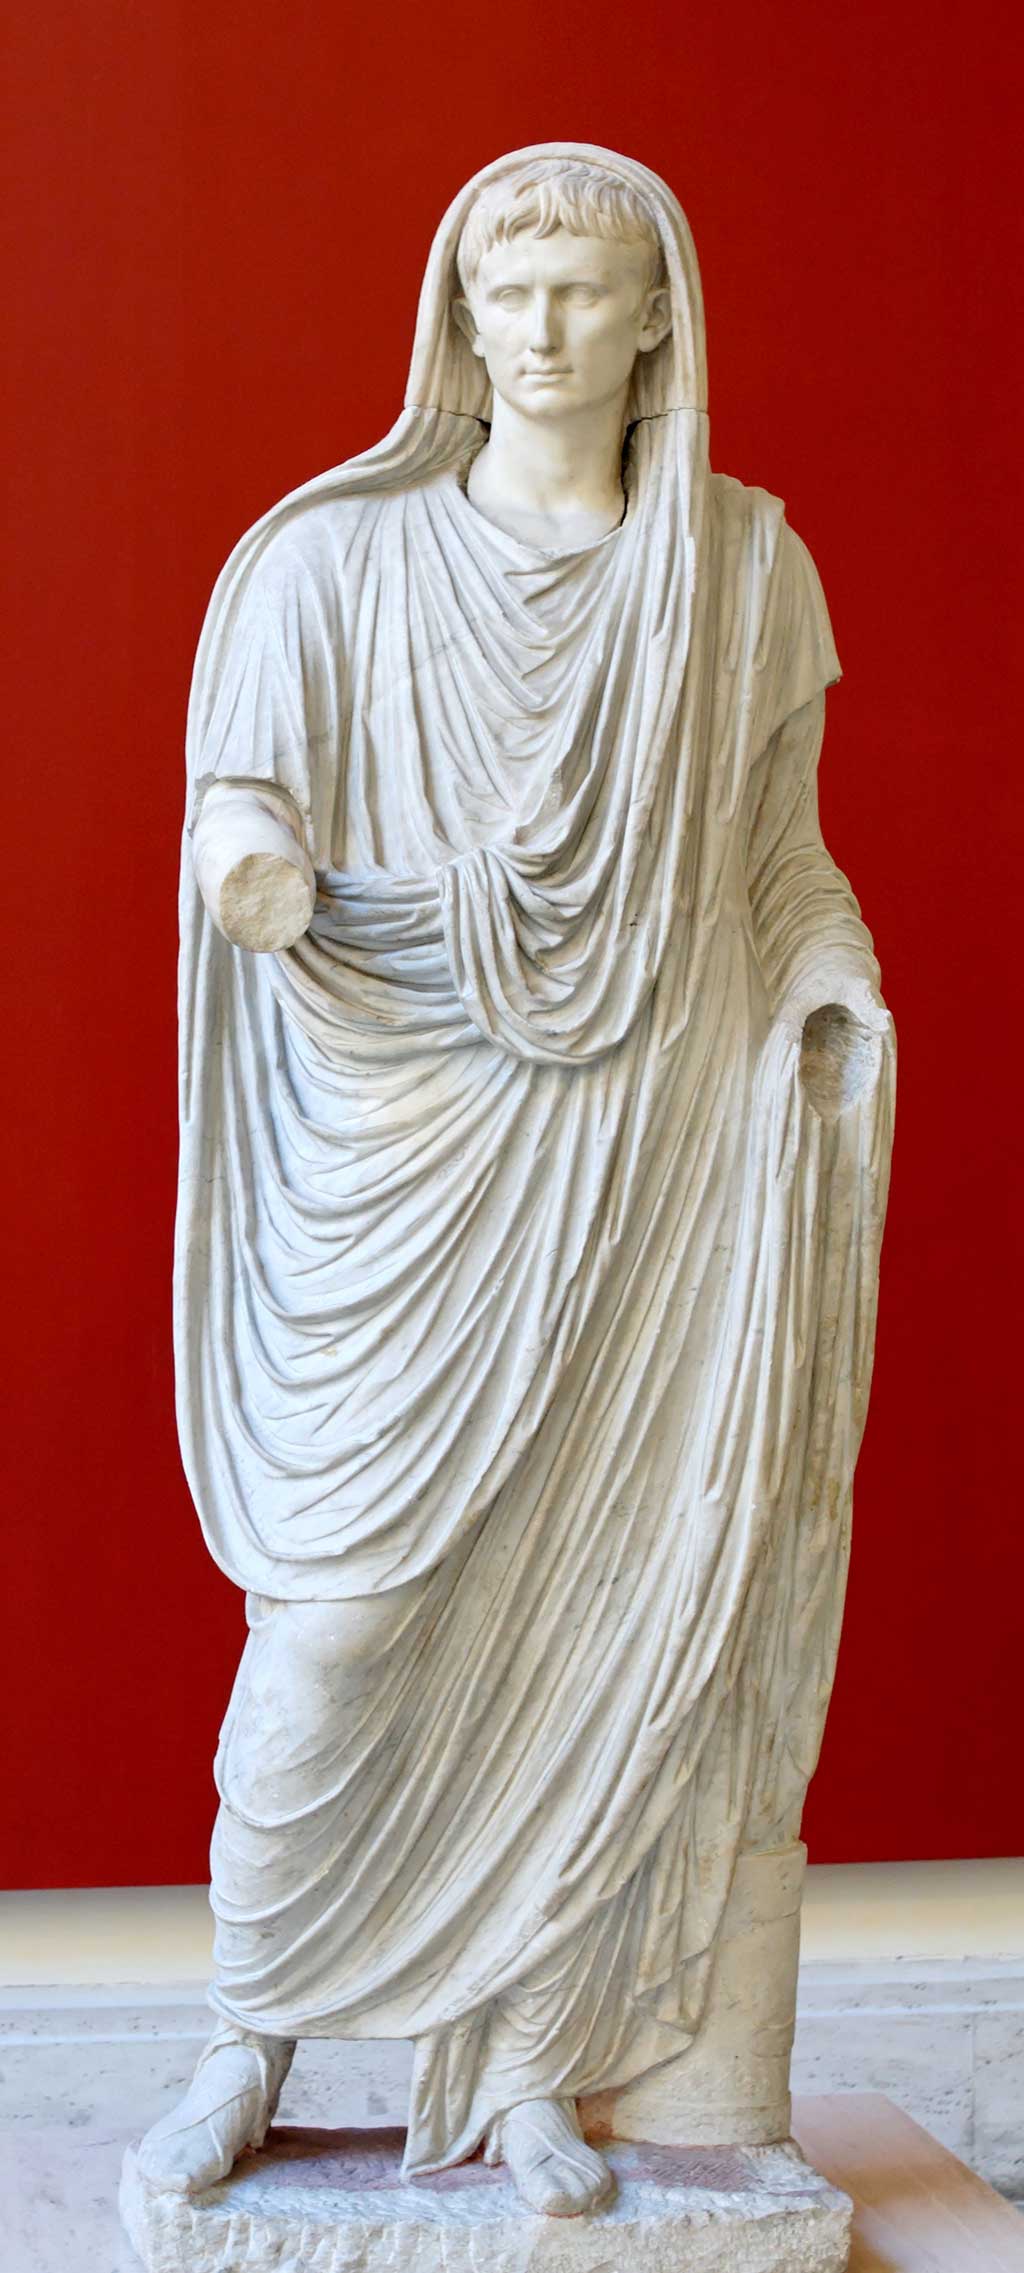 This photo shows a statue of Augustus portrayed as Pontifex Maximus, attired with a toga over his ever-youthful head, an attribute that serves to remind viewers of his own extreme piety to the gods.